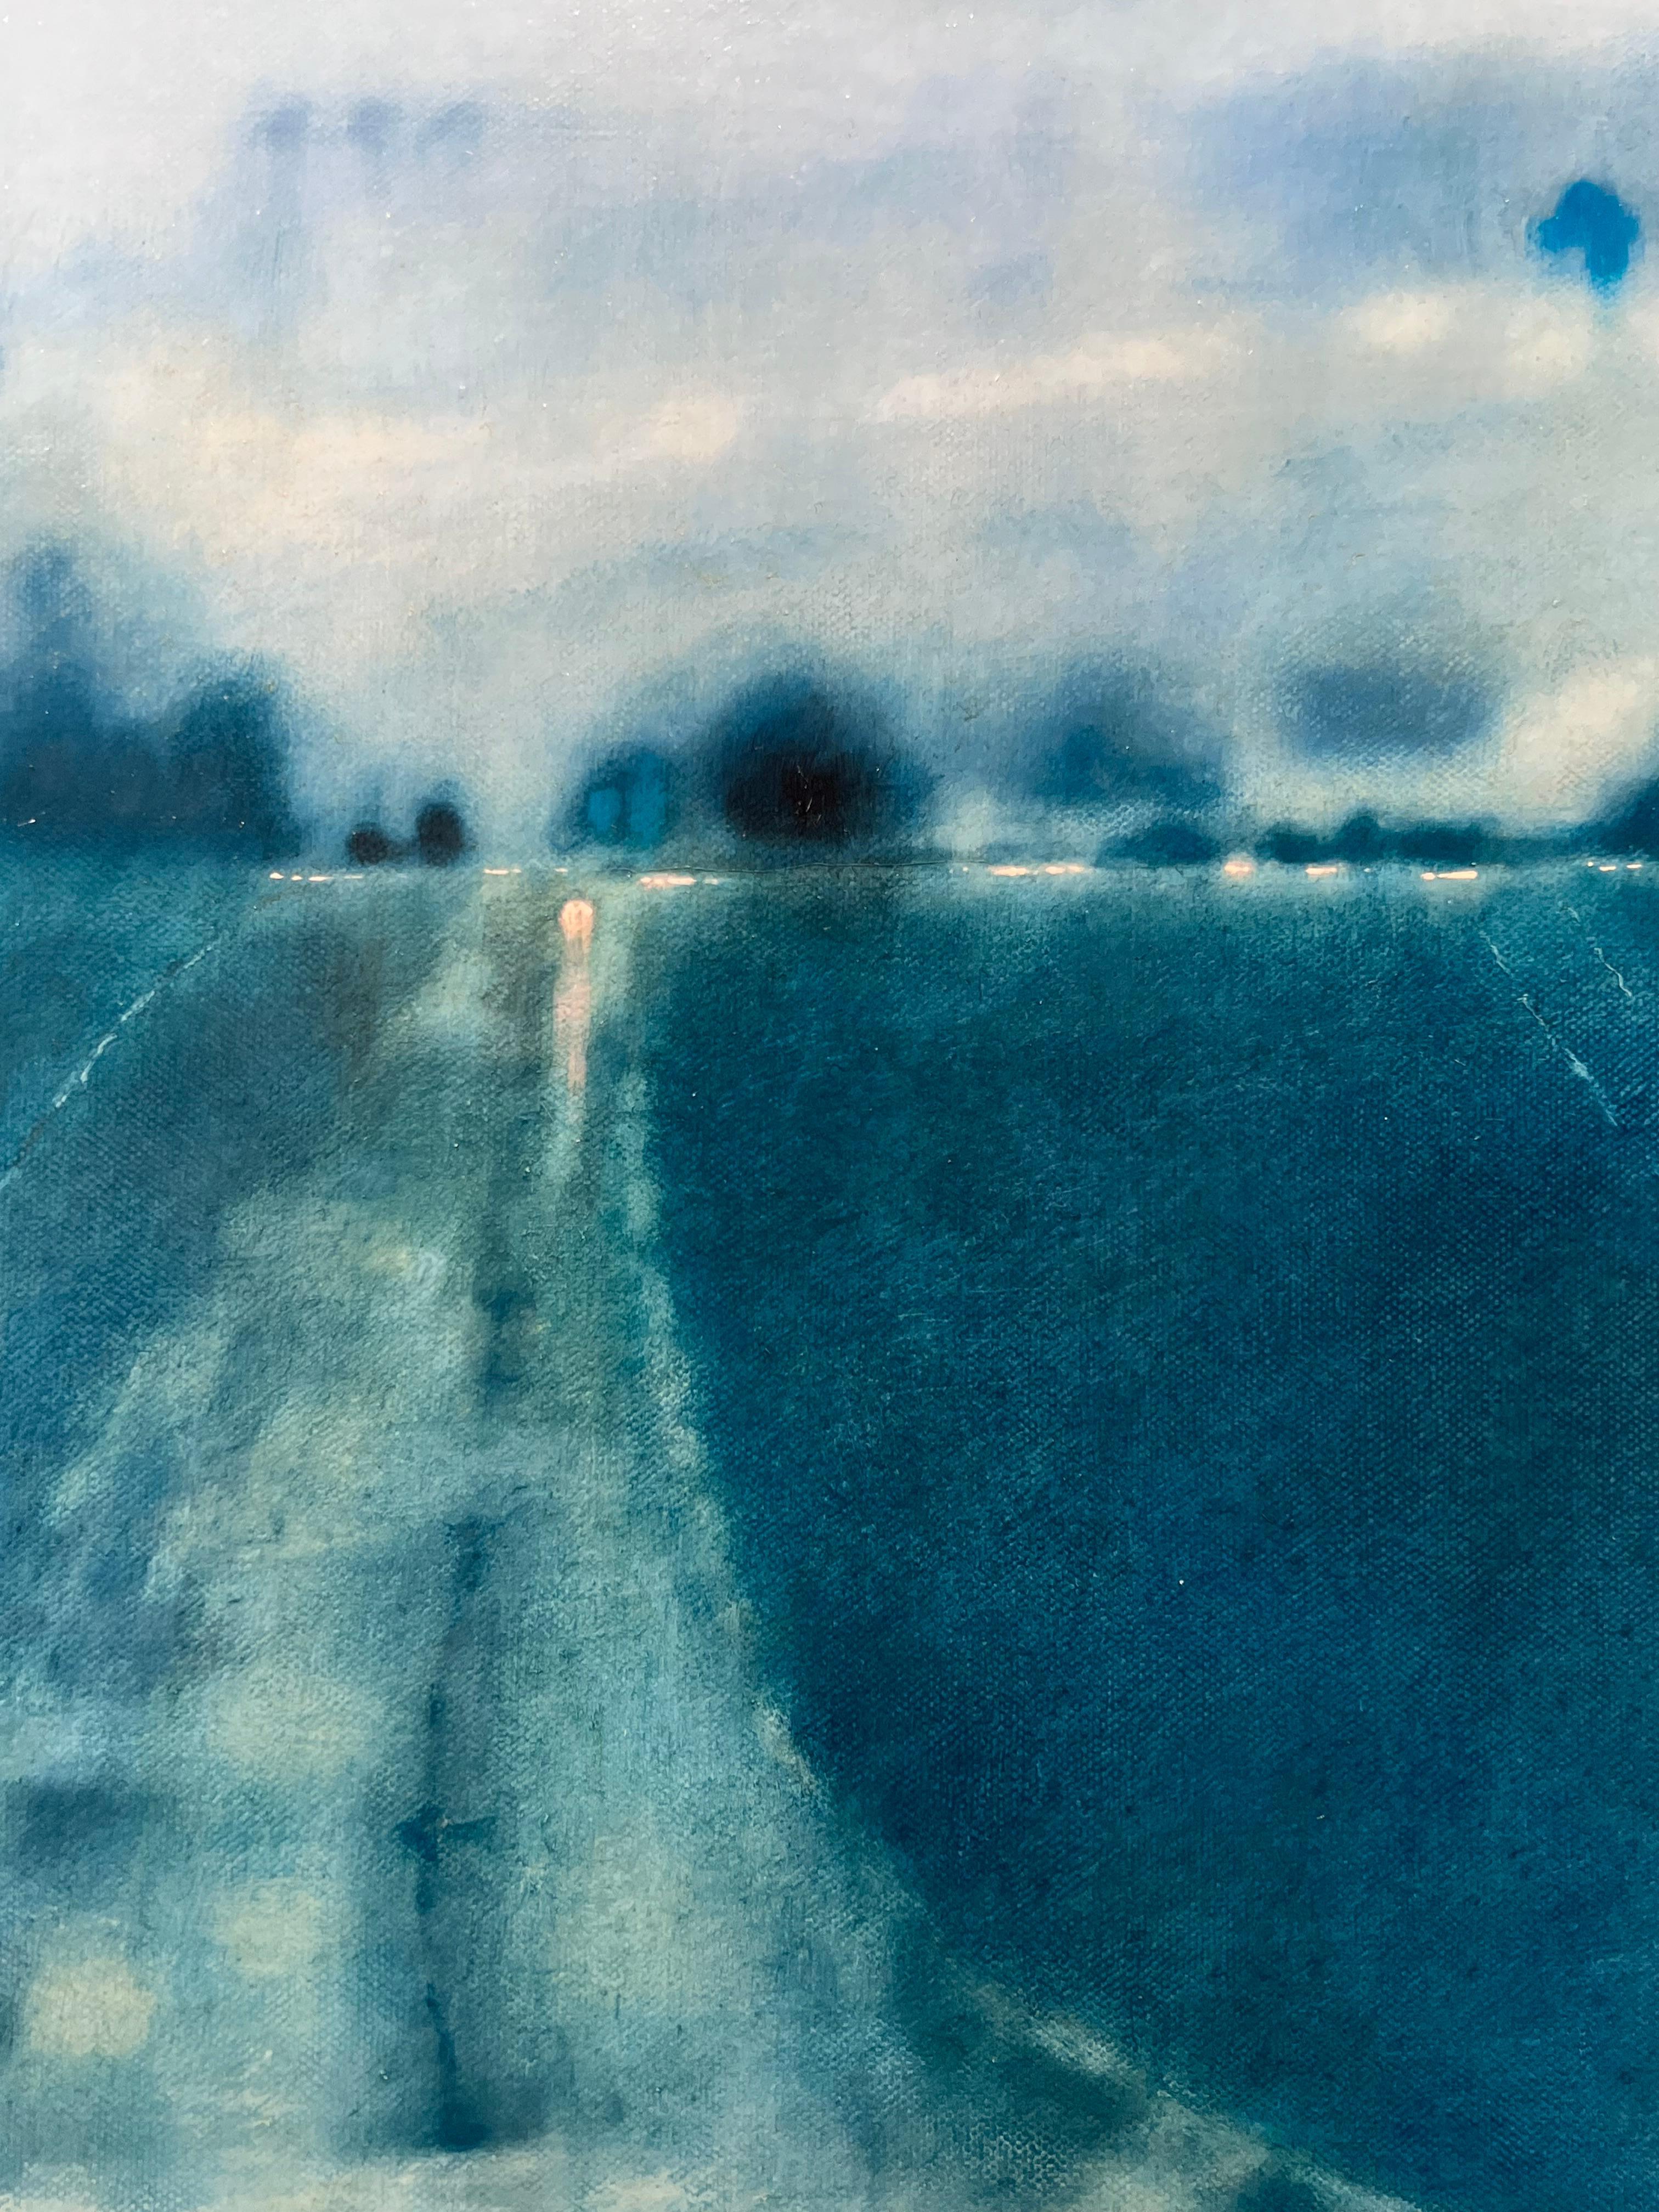 Watery furrows shine-original abstract landscape oil painting-contemporary art - Blue Landscape Painting by Tania Rutland